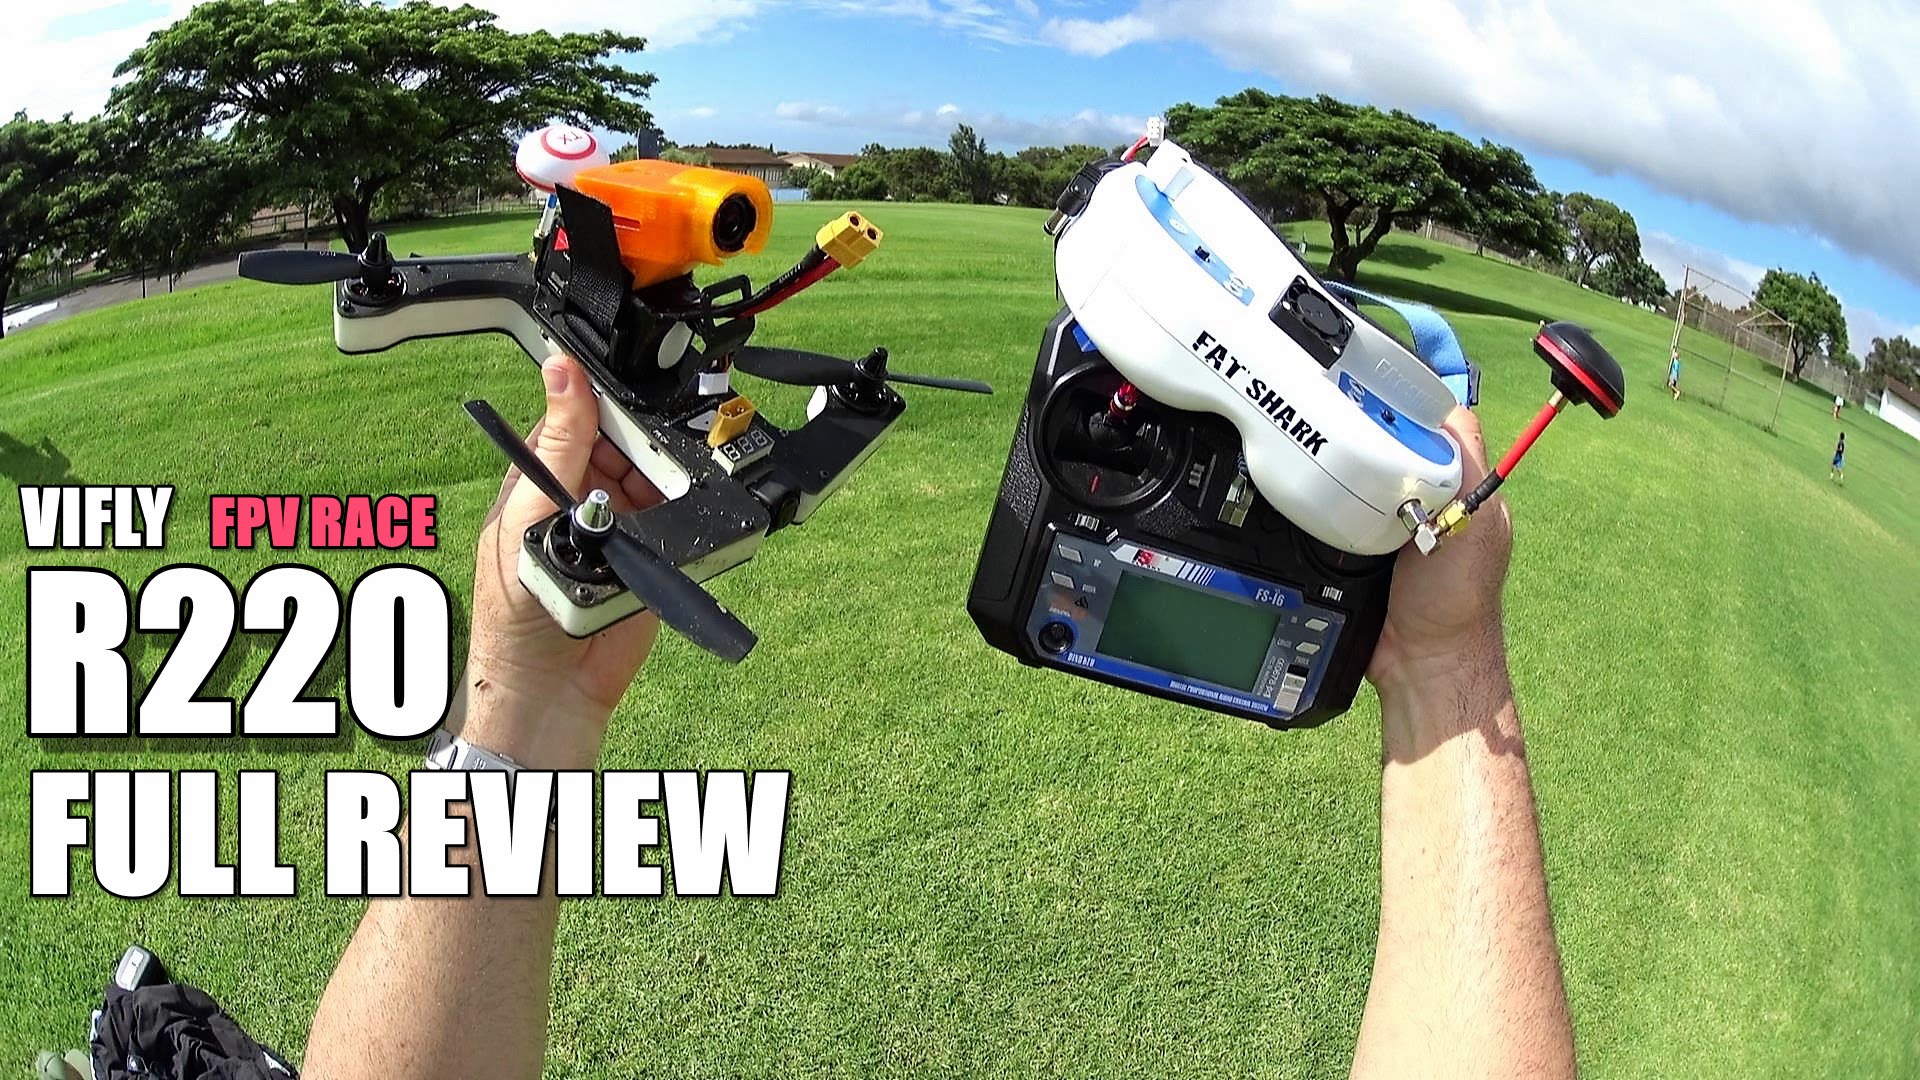 VIFLY R220 FPV Race Drone – Full Review – [UnBox, Inspection, FlightCrash Test, Pros Cons]